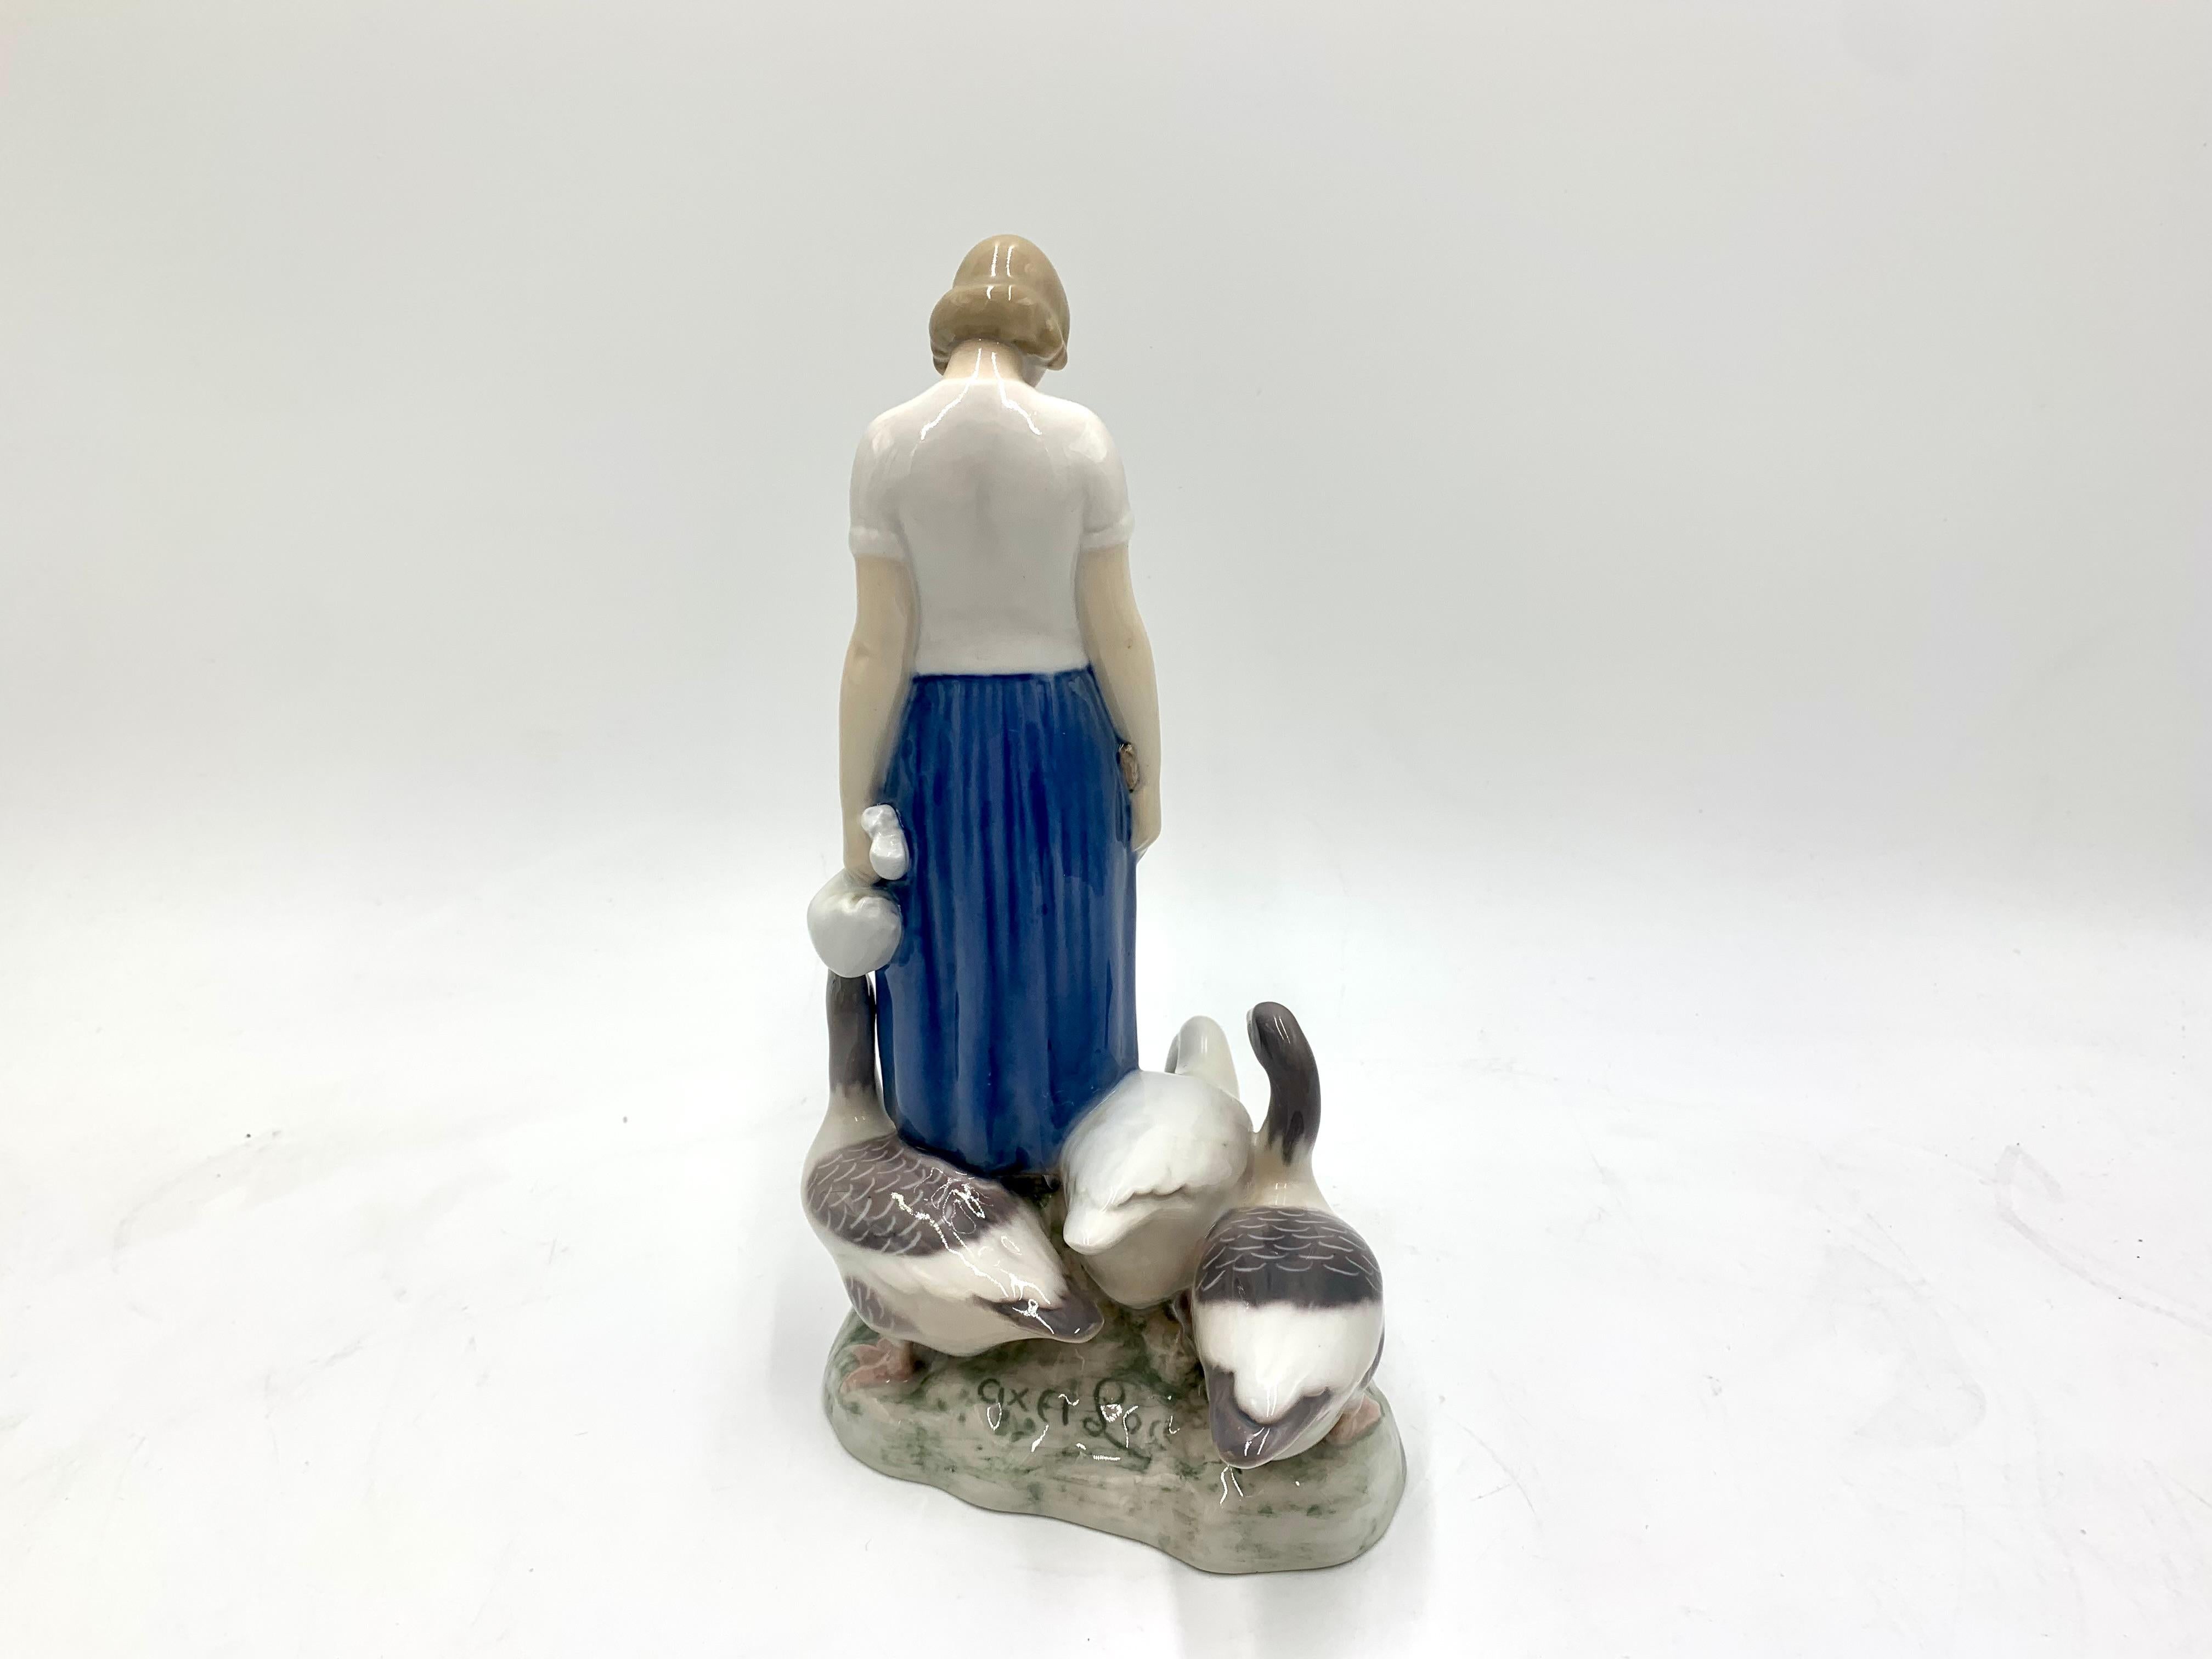 Danish Porcelain Figurine of a Woman with Geese, Bing & Grondahl, Denmark, 1950s / 1960